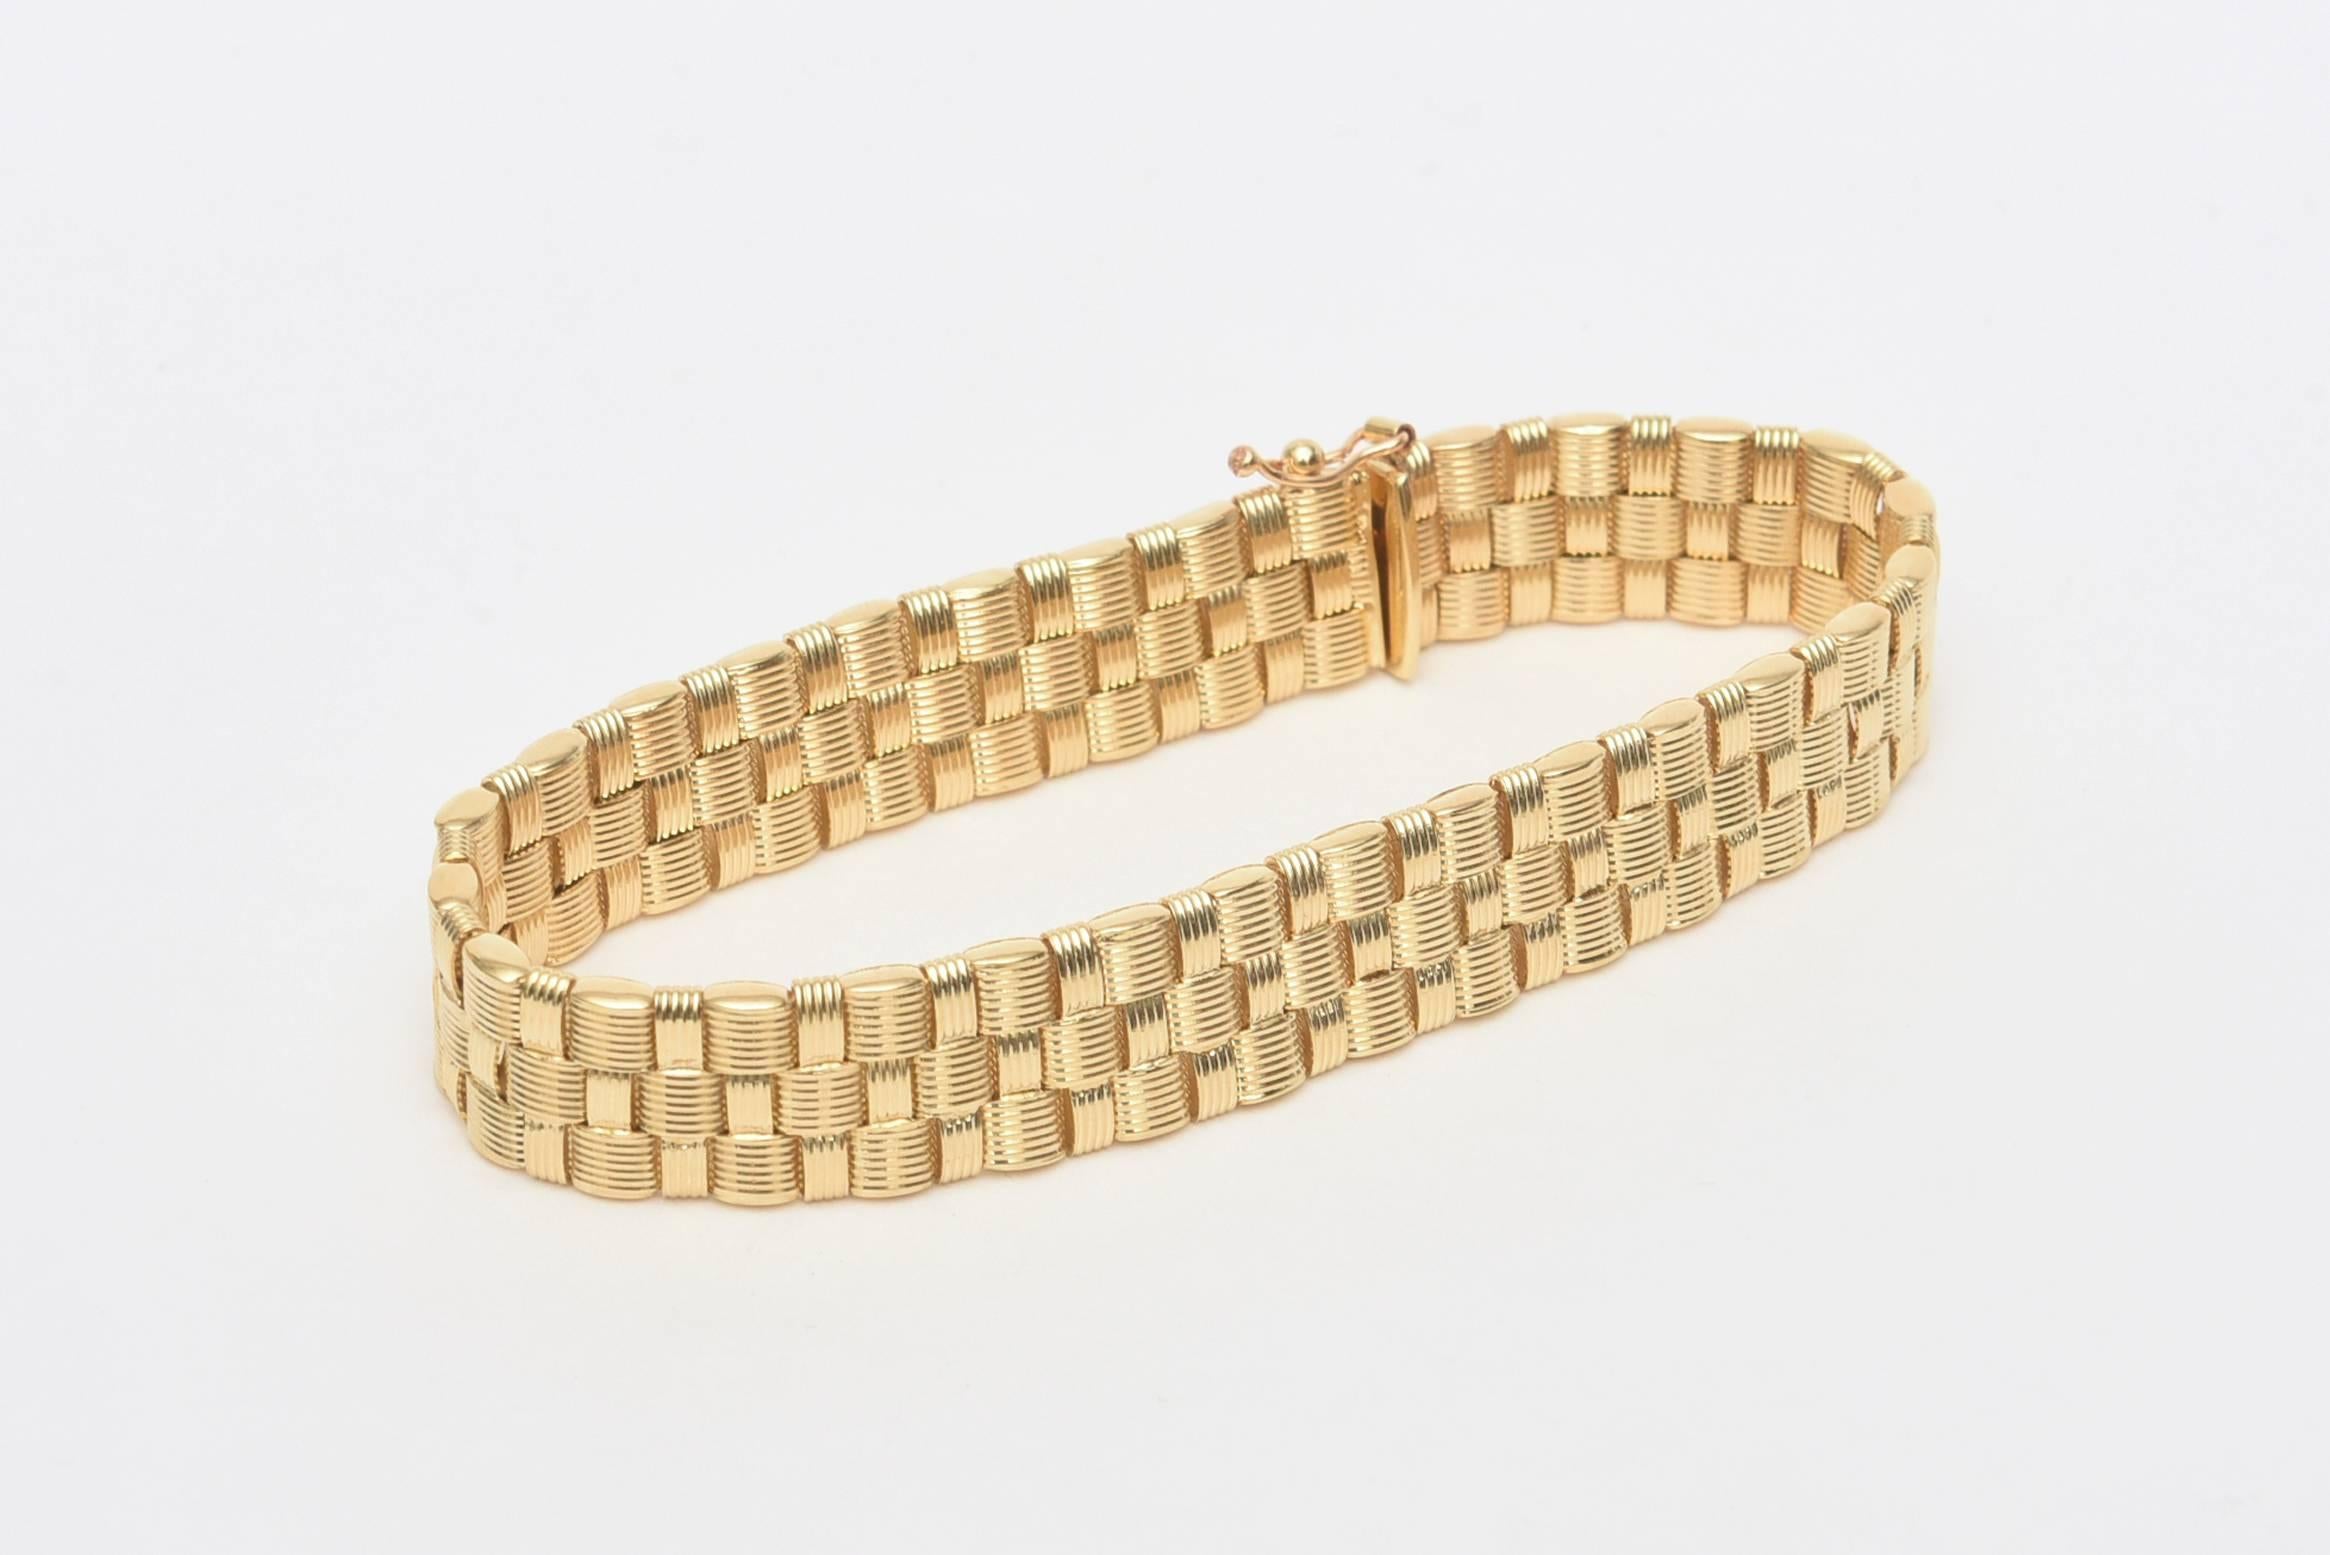 This lovely woven 14 K yellow gold bracelet has elegance and simplicity. It is marked Italy. It is 13 DWT or penny weight. When opened it is 7.5